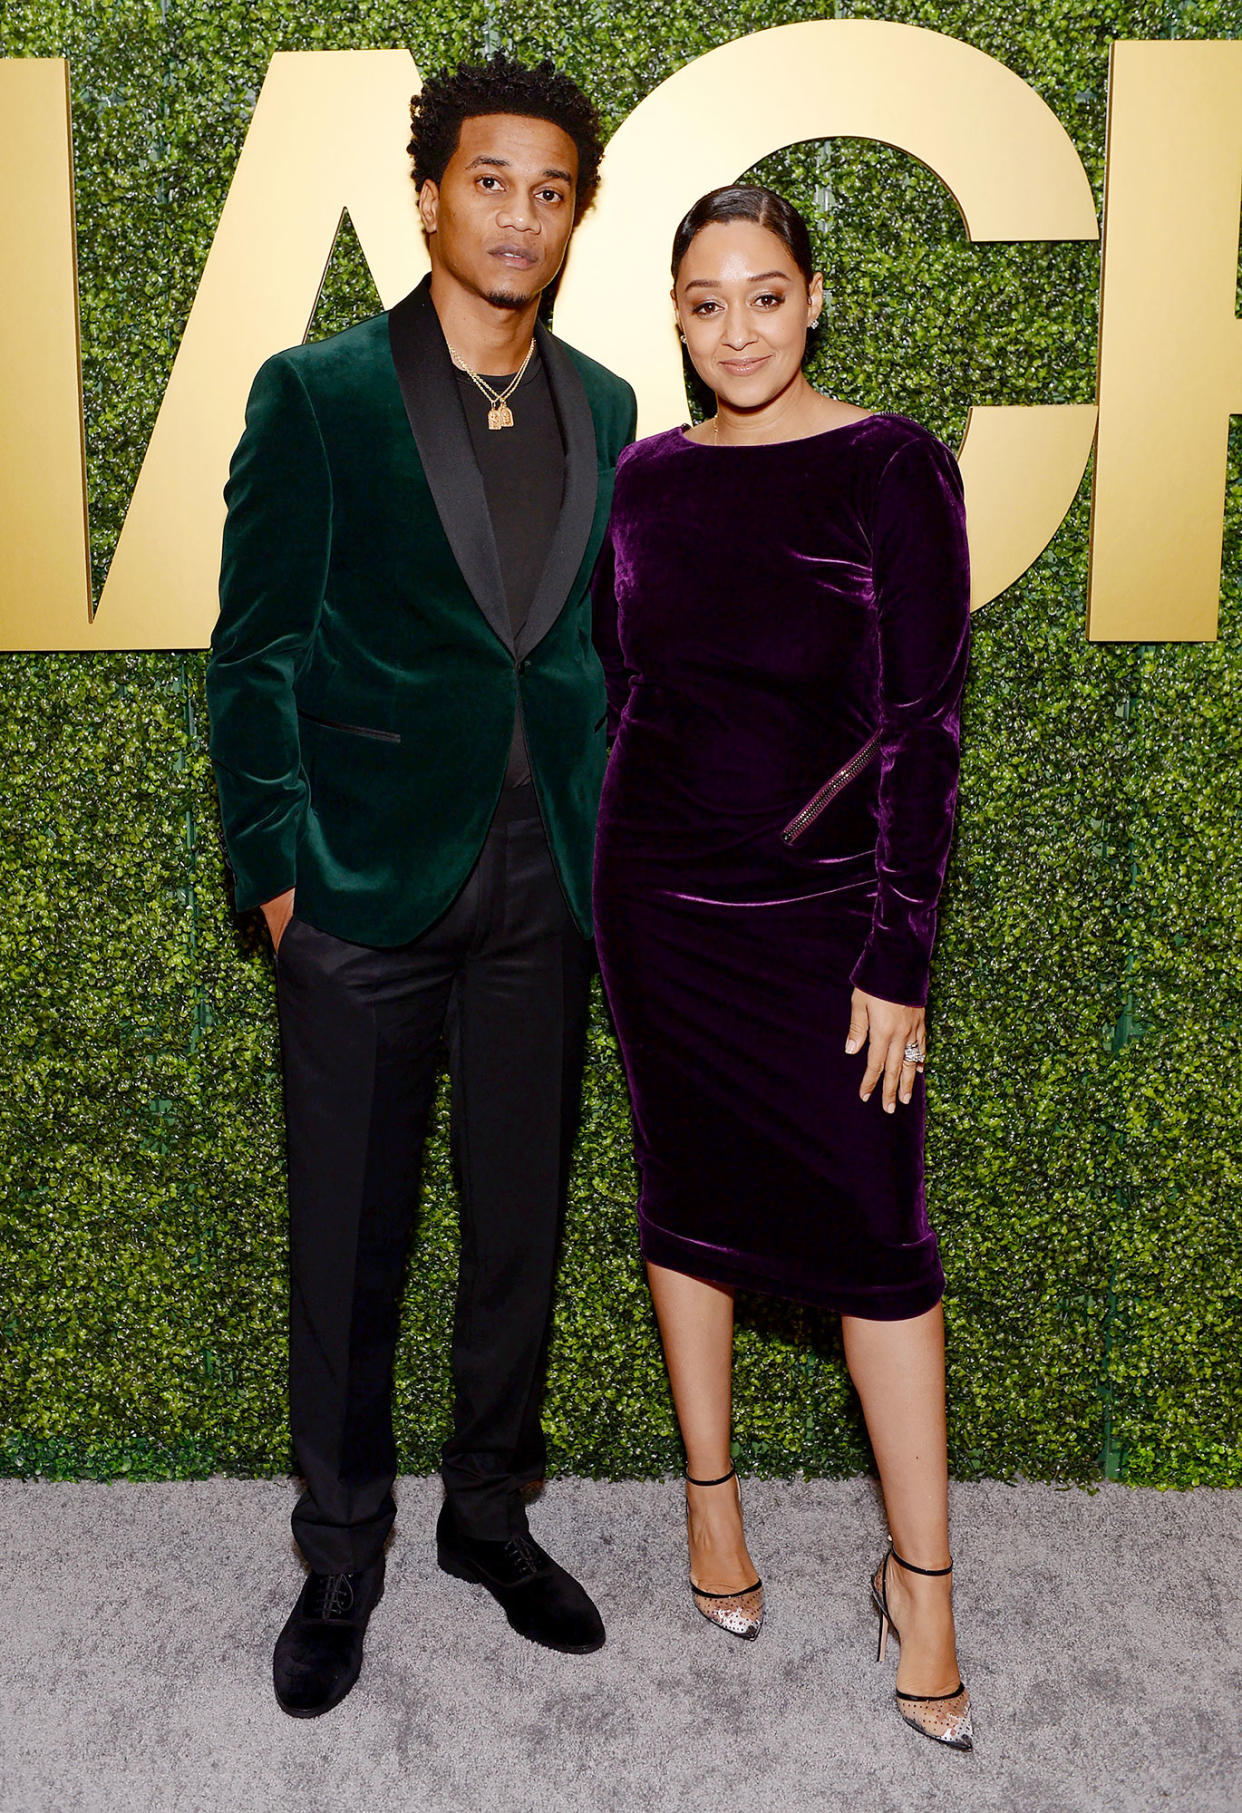 Tia Mowry Gets Emotional About Recovering From Cory Hardrict Divorce